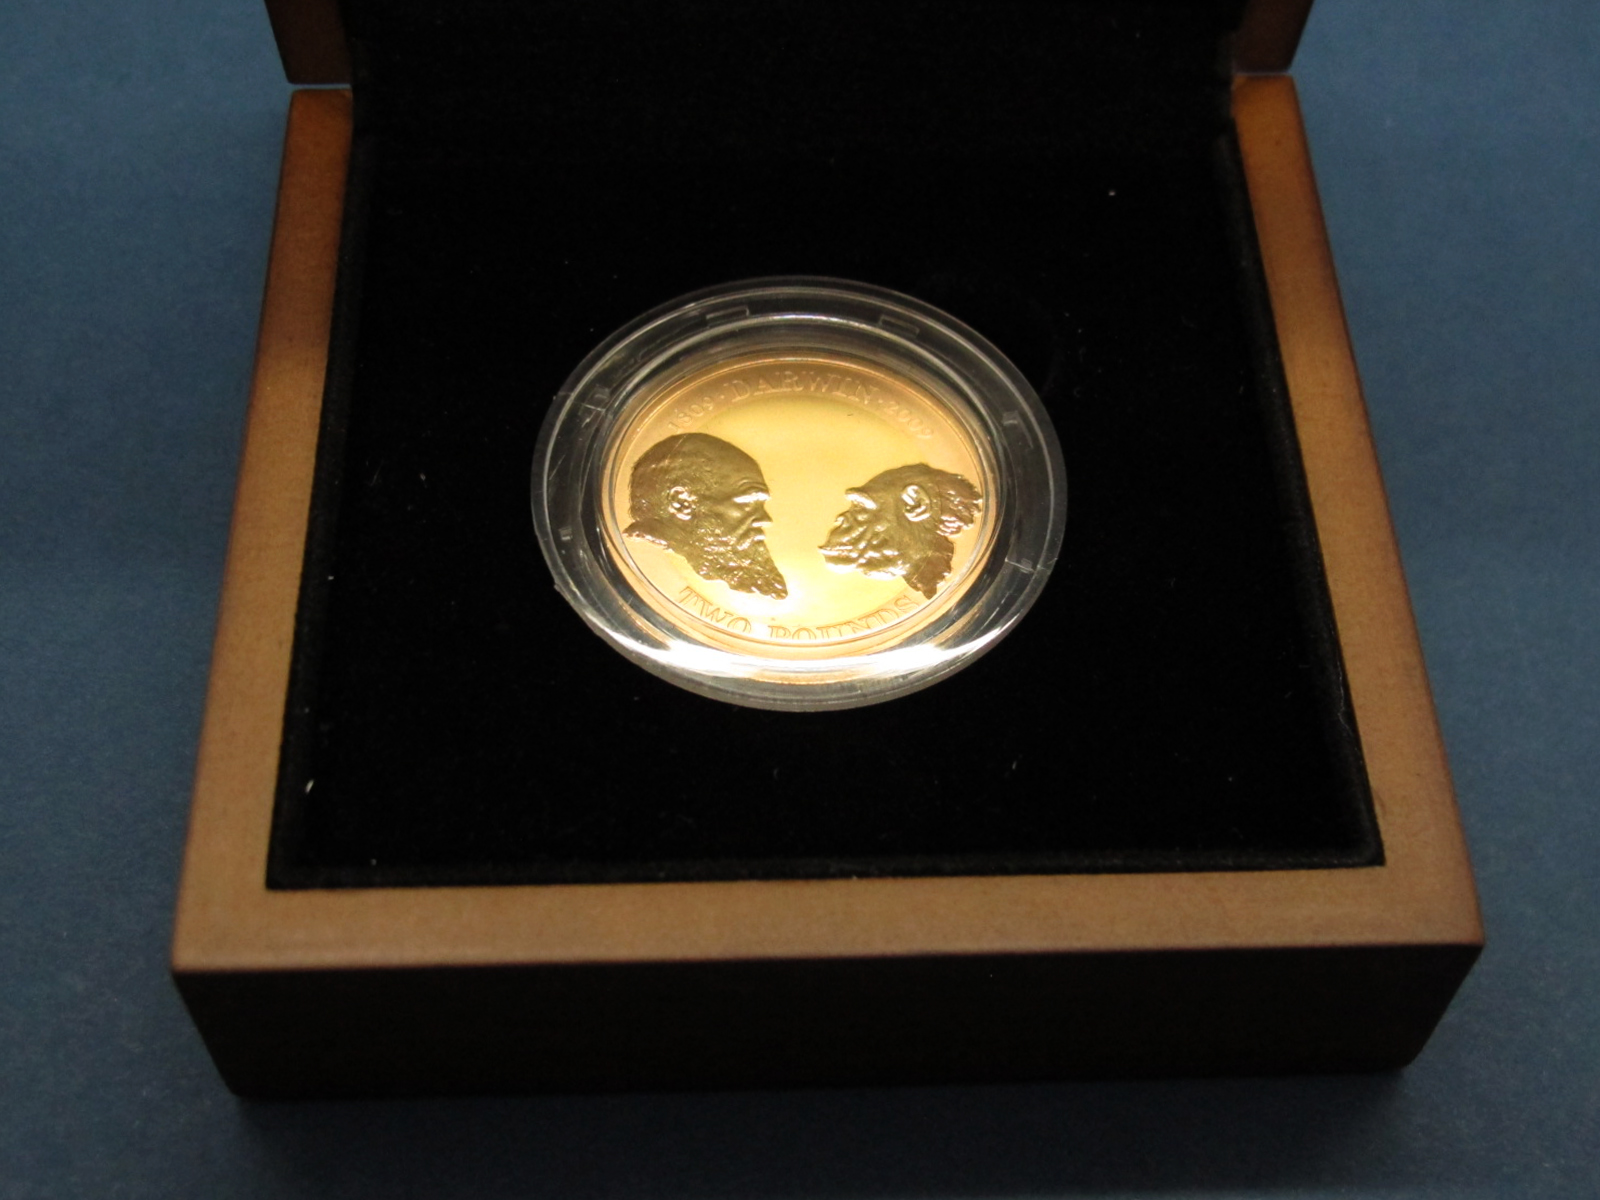 The Royal Mint 2009 UK Charles Darwin Two Pounds Gold Proof Coin, certified No.0322, cased.